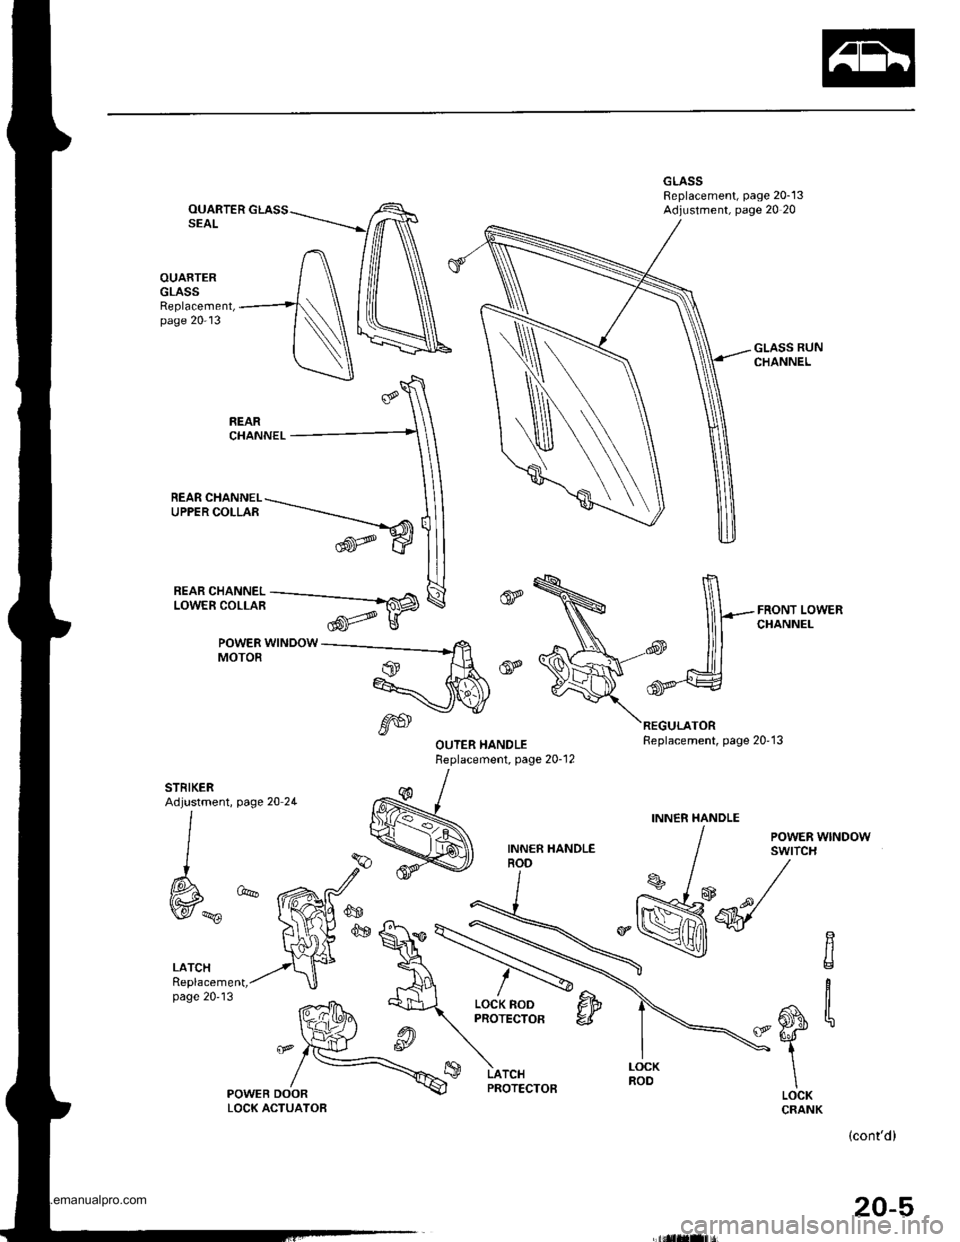 HONDA CR-V 1998 RD1-RD3 / 1.G Workshop Manual 
OUARTERSEAL
OUARTERGLASSReplacement,page 20-13
-flHiili^i--_Fffi
POWER WINDOWMOTOR
REAR CHANNEL-\UPPERCOLLAR -.-----_----_-""
trw
page 20 2L
LATCHReplacement,page 2013
POWEB DOORLOCK ACTUATOB
,6S
R